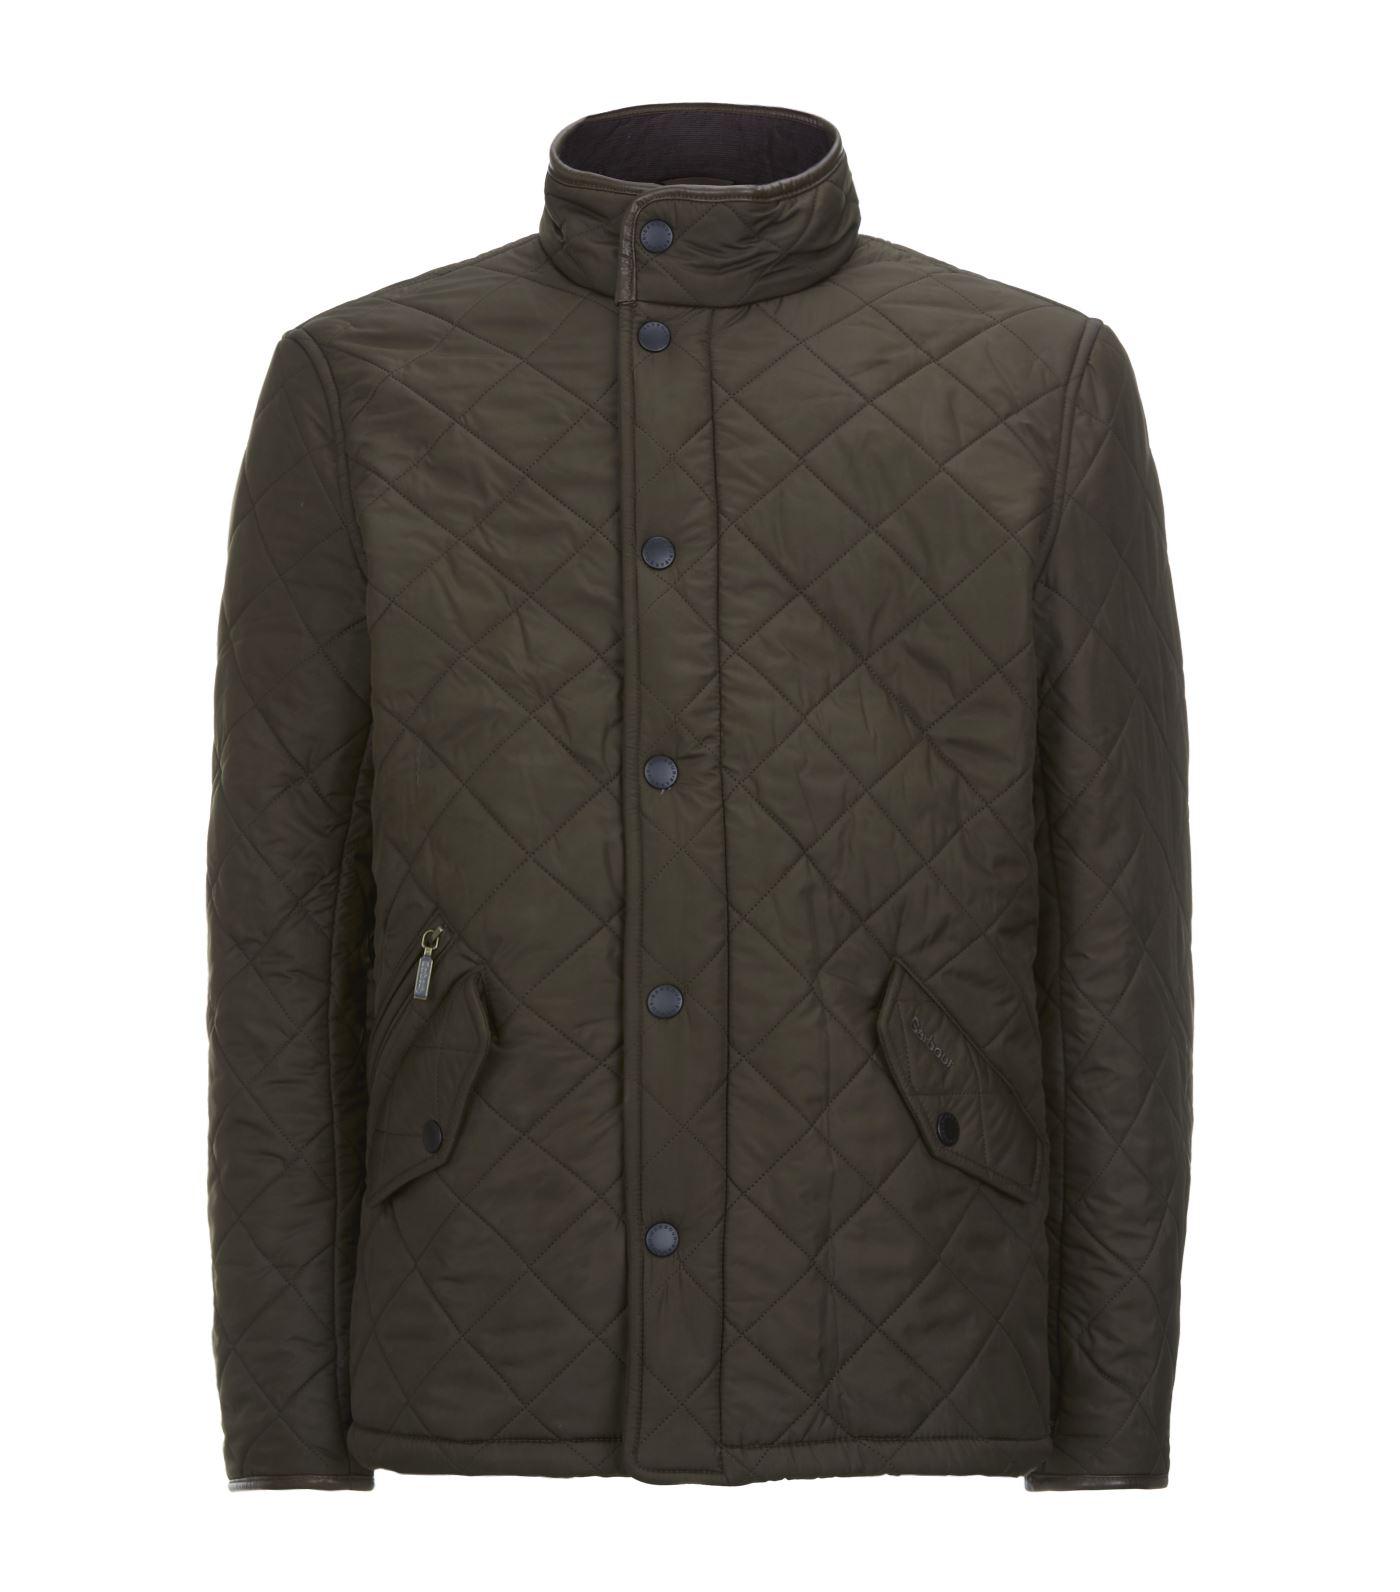 Lyst - Barbour Powell Quilted Jacket in Green for Men